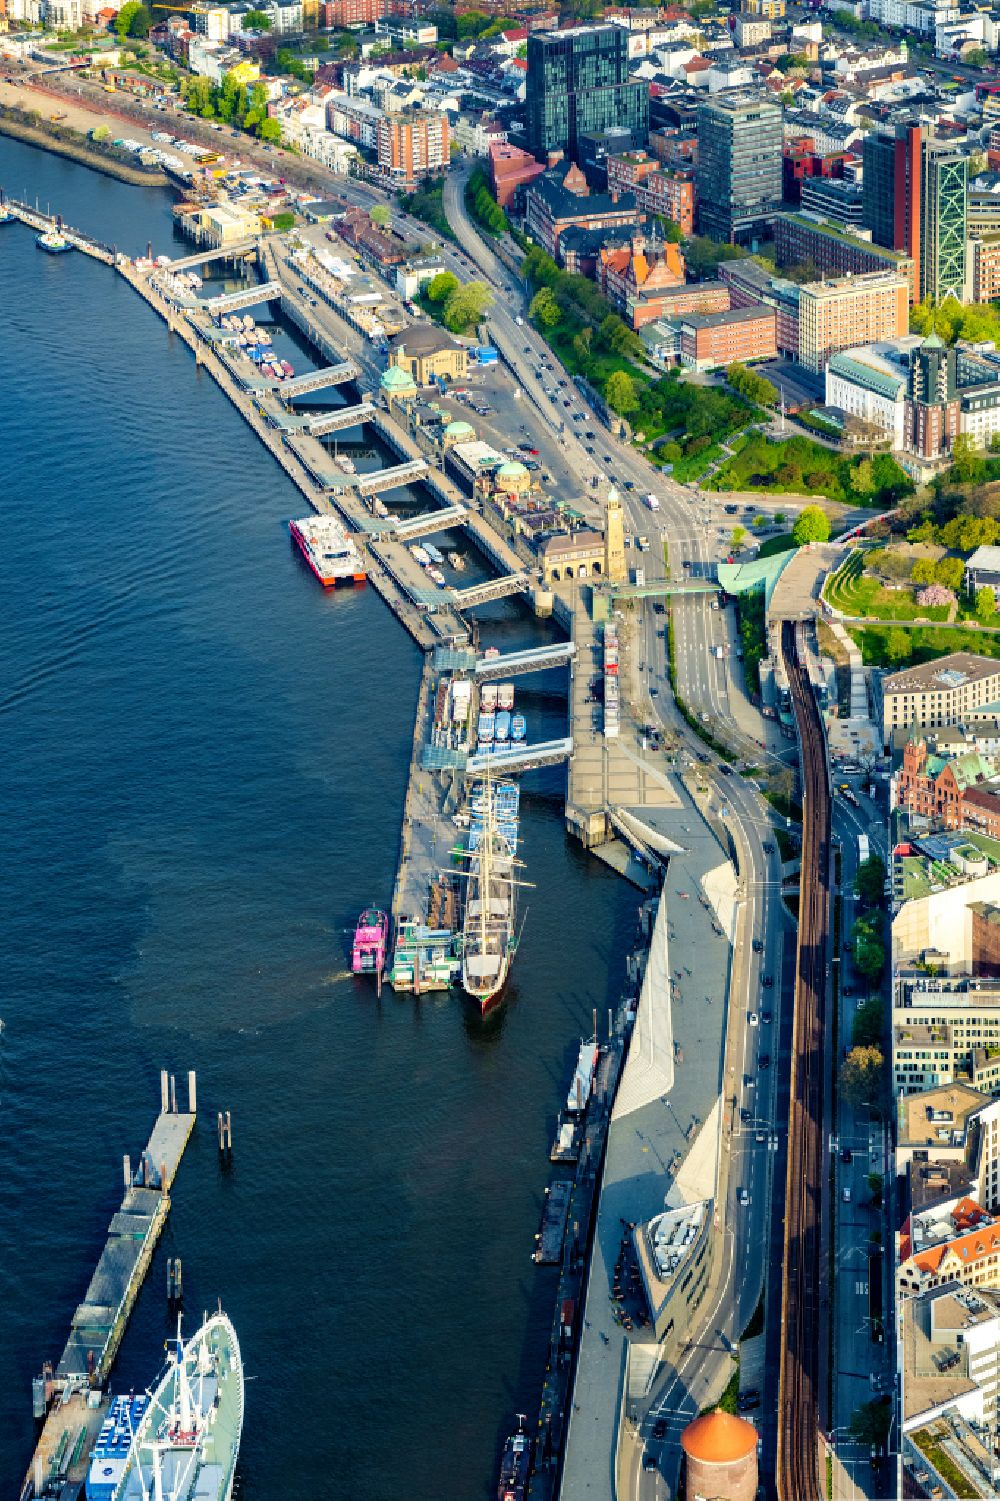 Hamburg from the bird's eye view: Port facilities and jetties sunset in St.Pauli on the banks of the river course of the of the River Elbe in Hamburg, Germany